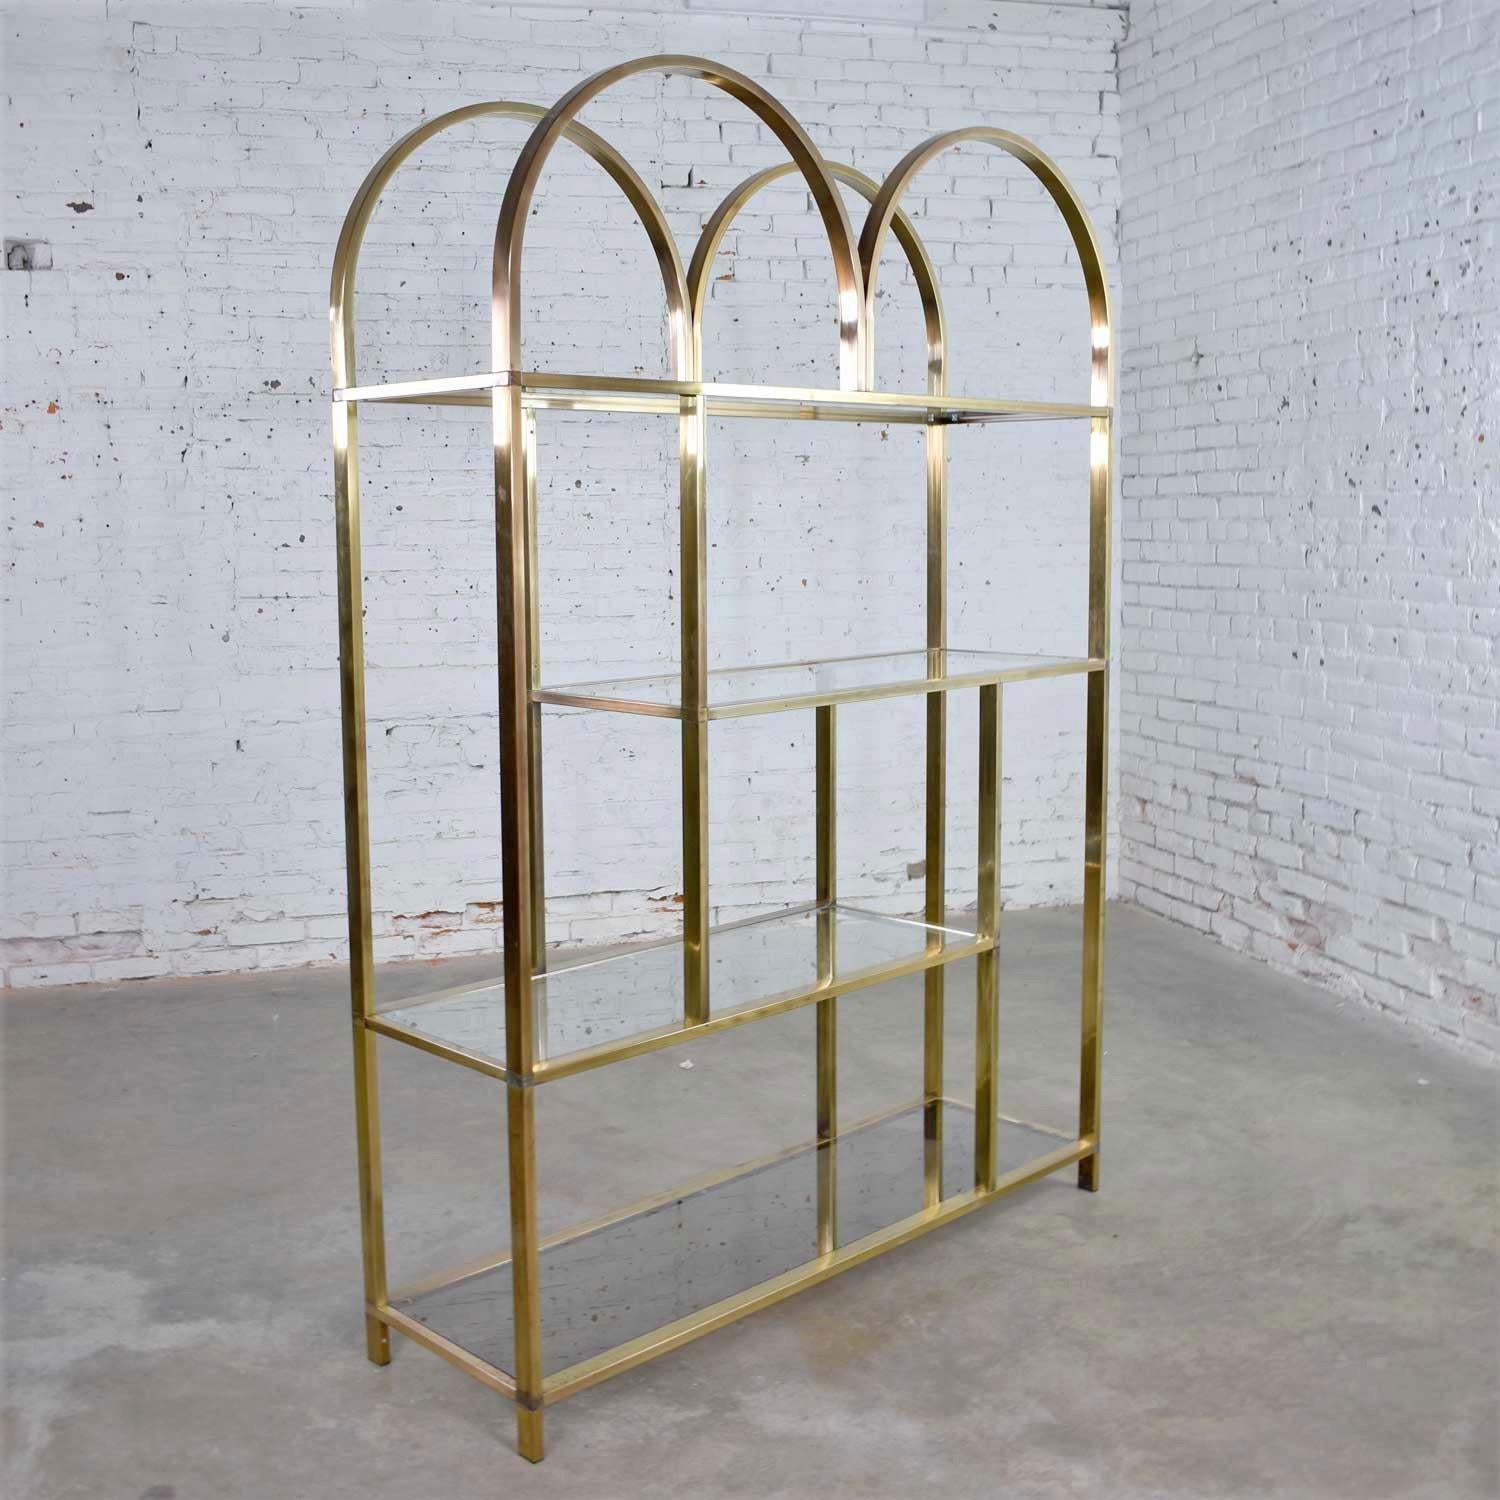 Unknown Vintage Modern Double Arched Étagère Display Shelves Brass Plated and Glass